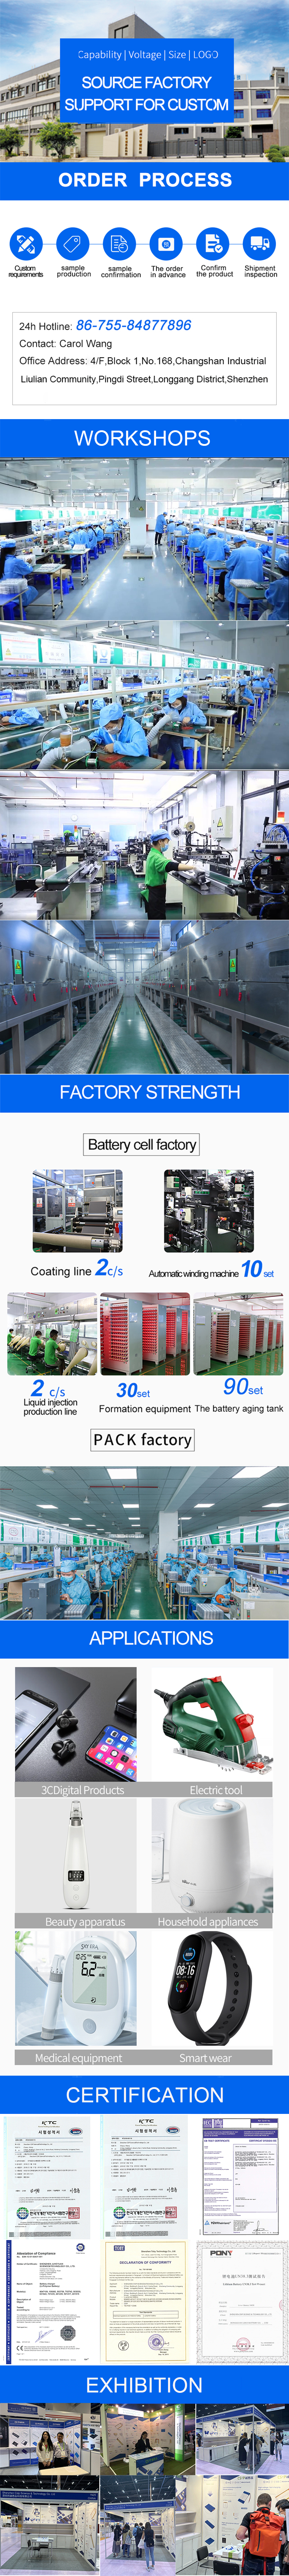 lithium ion battery cost factory CSIP